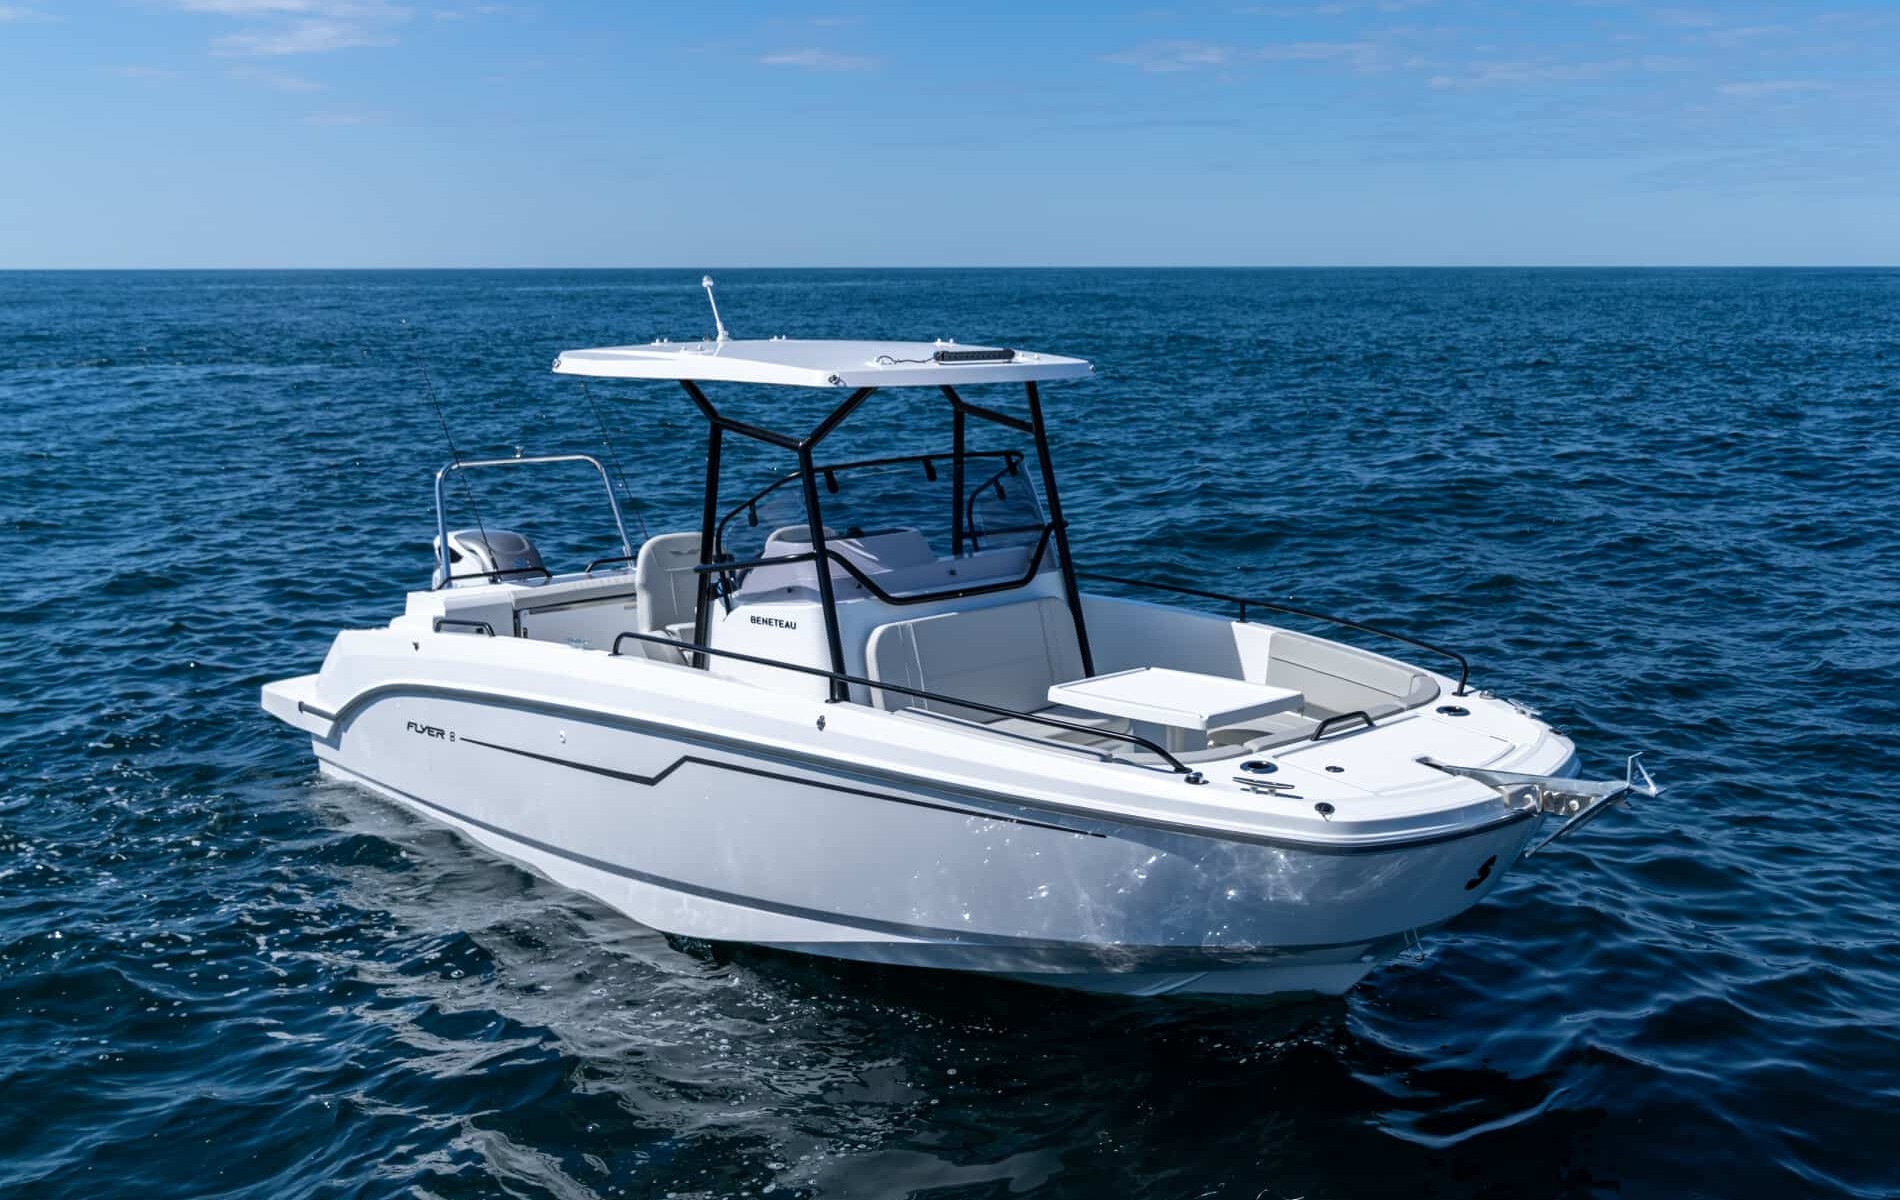 The FLYER 8 SPACEdeck by Beneteau Outboard